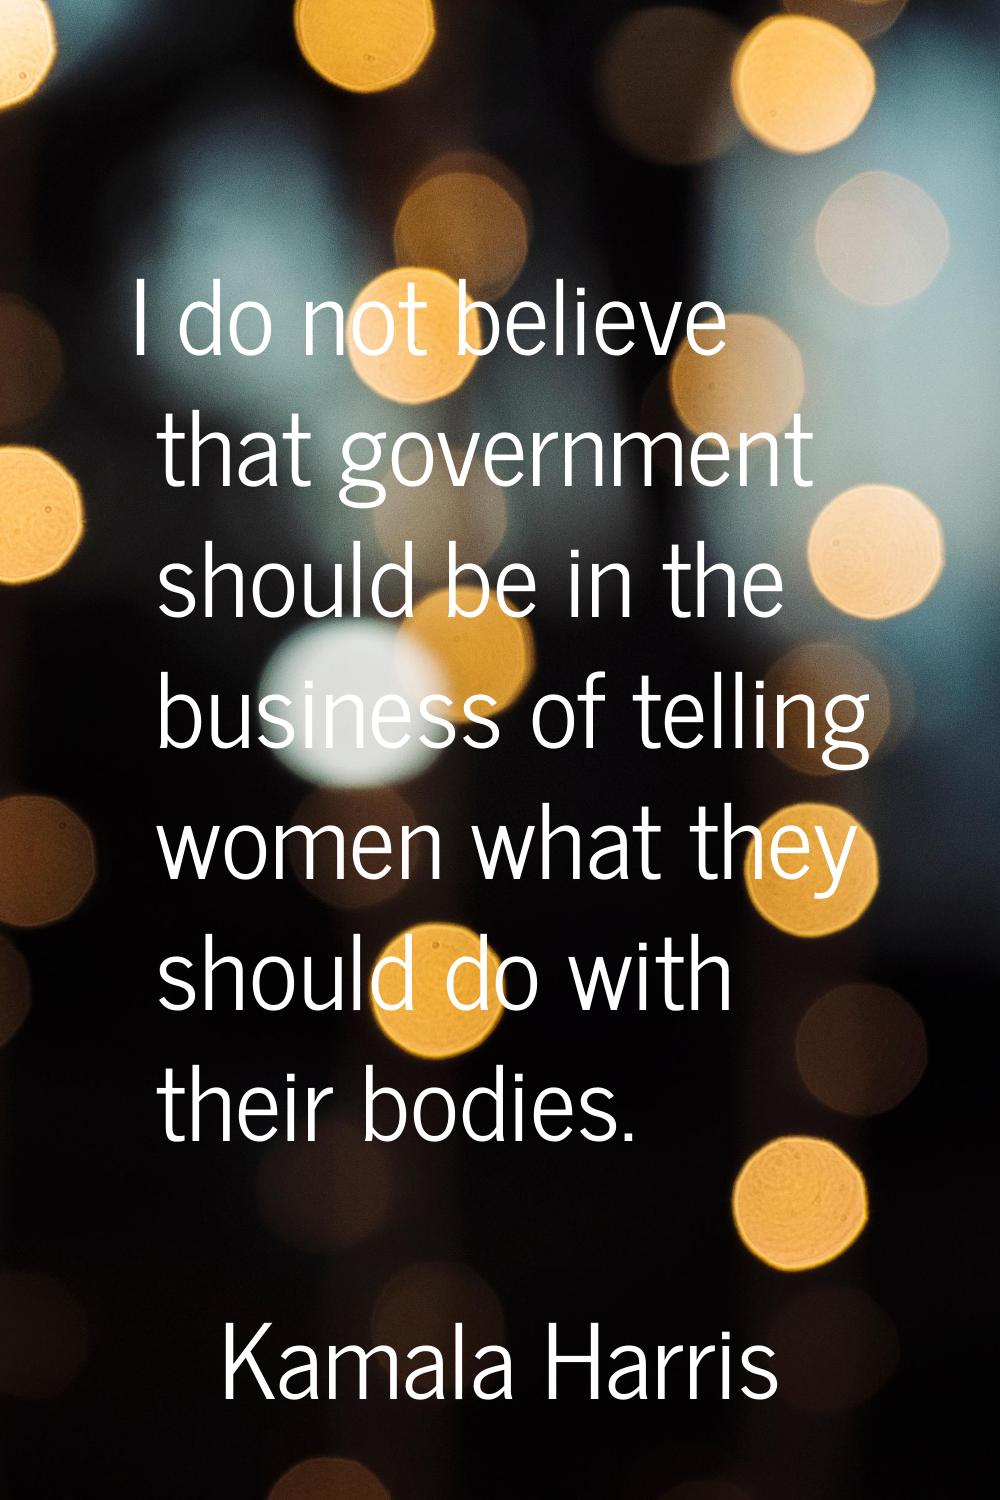 I do not believe that government should be in the business of telling women what they should do wit